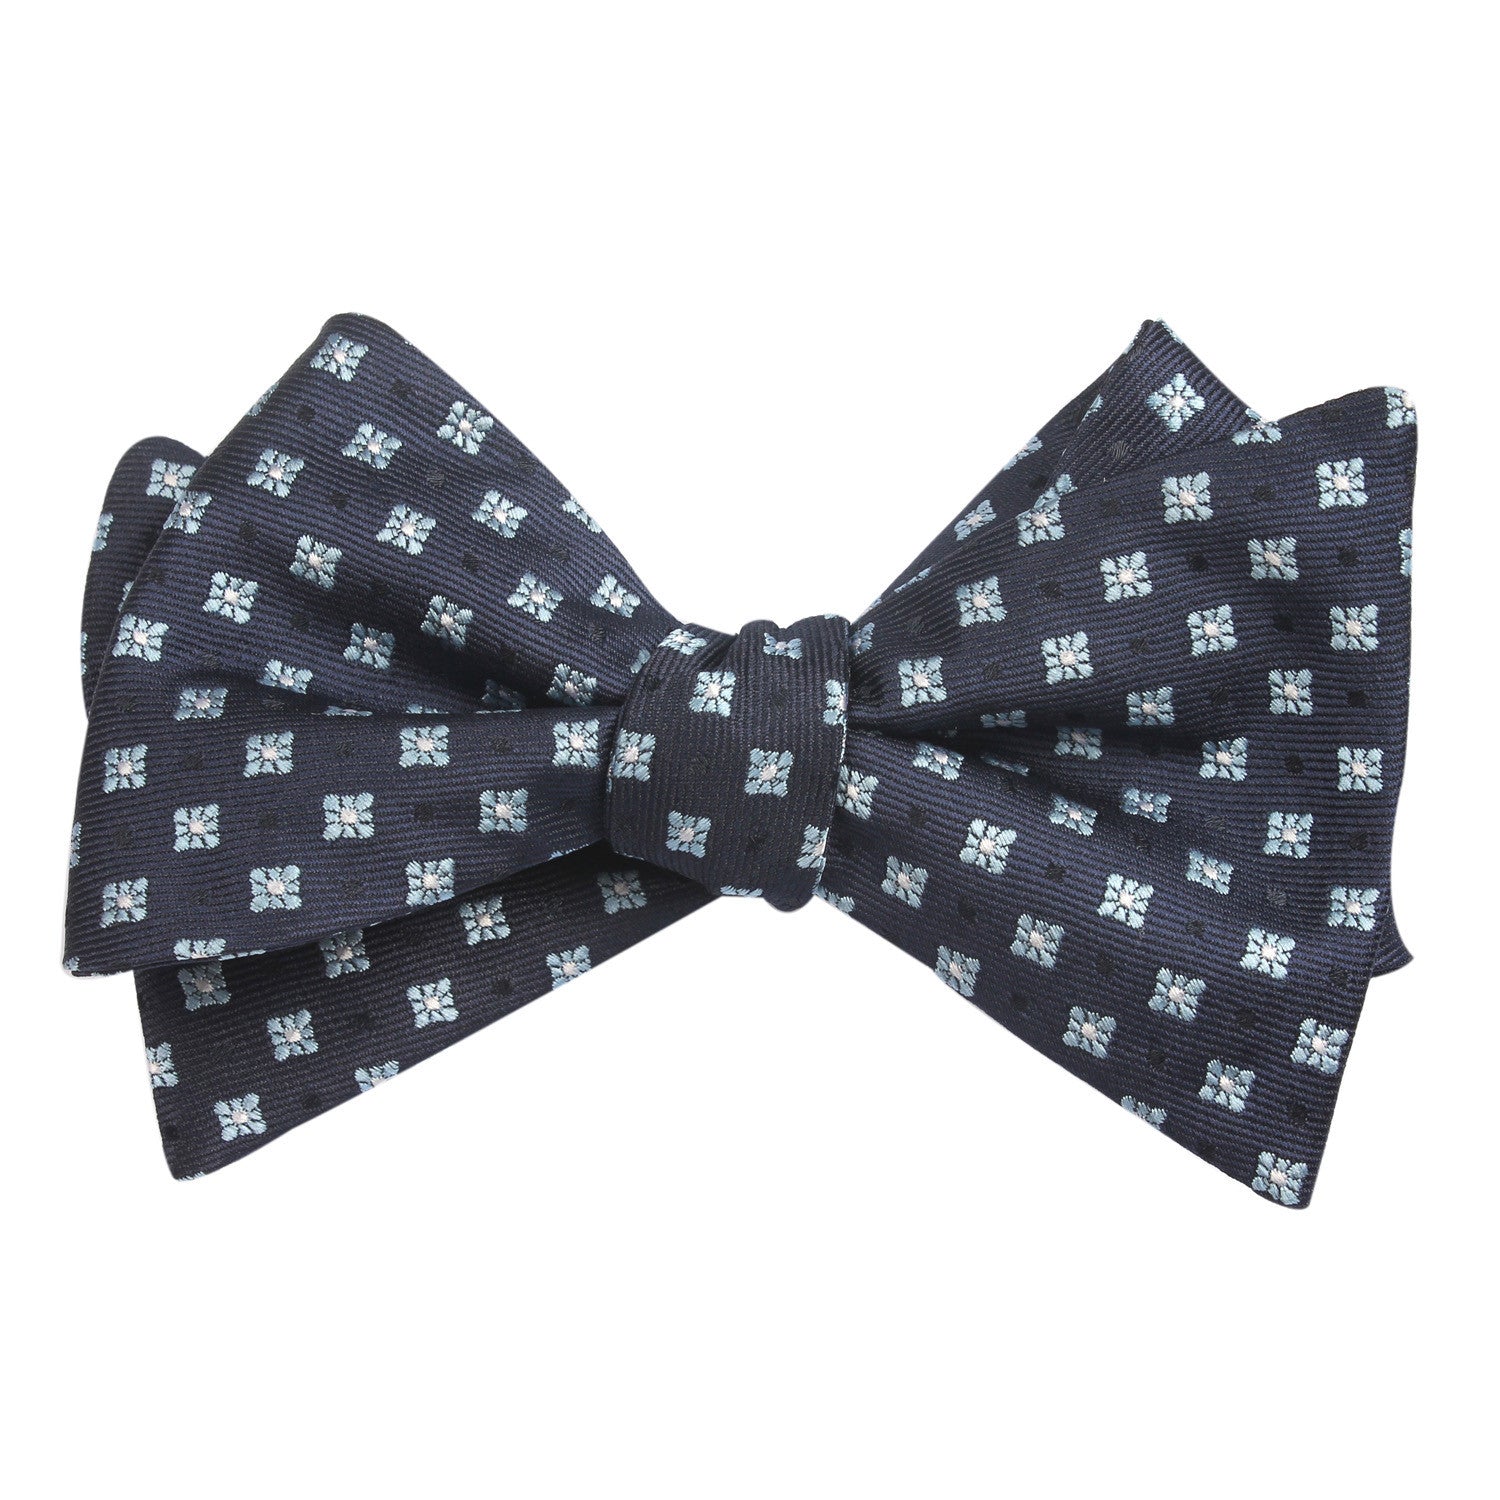 Navy Blue with Light Blue Pattern - Bow Tie (Untied) Self tied knot by OTAA